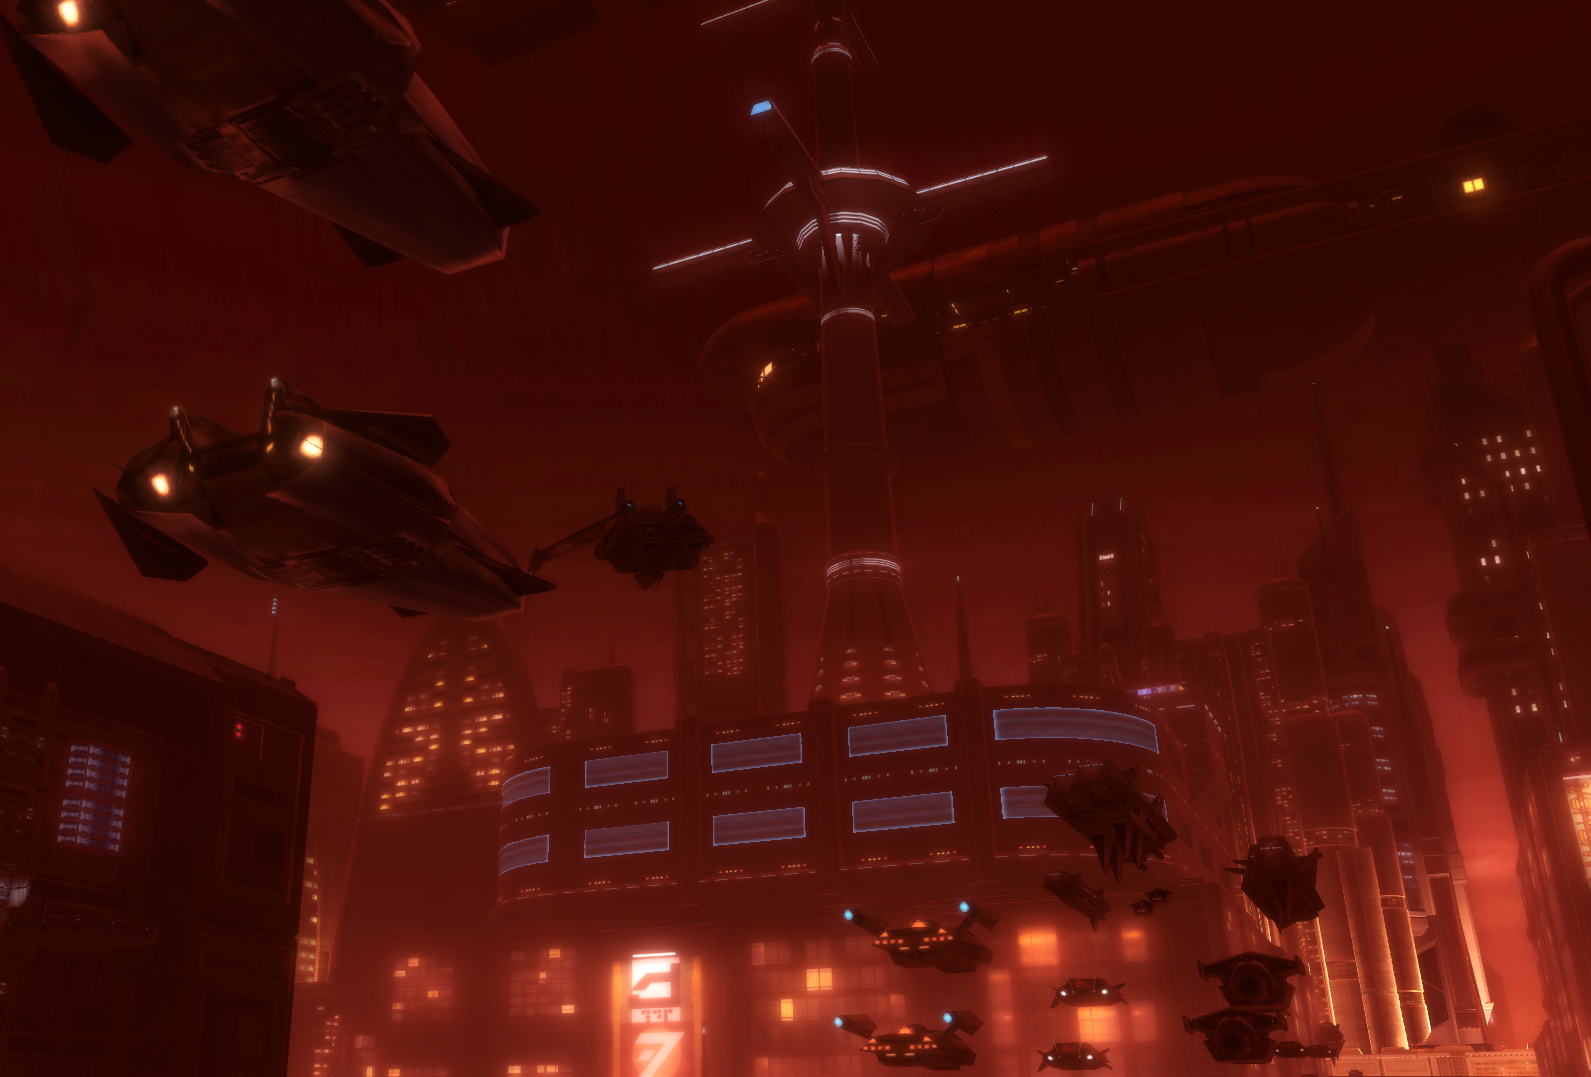 Swtor_2014-10-10_13-02-52-08.png